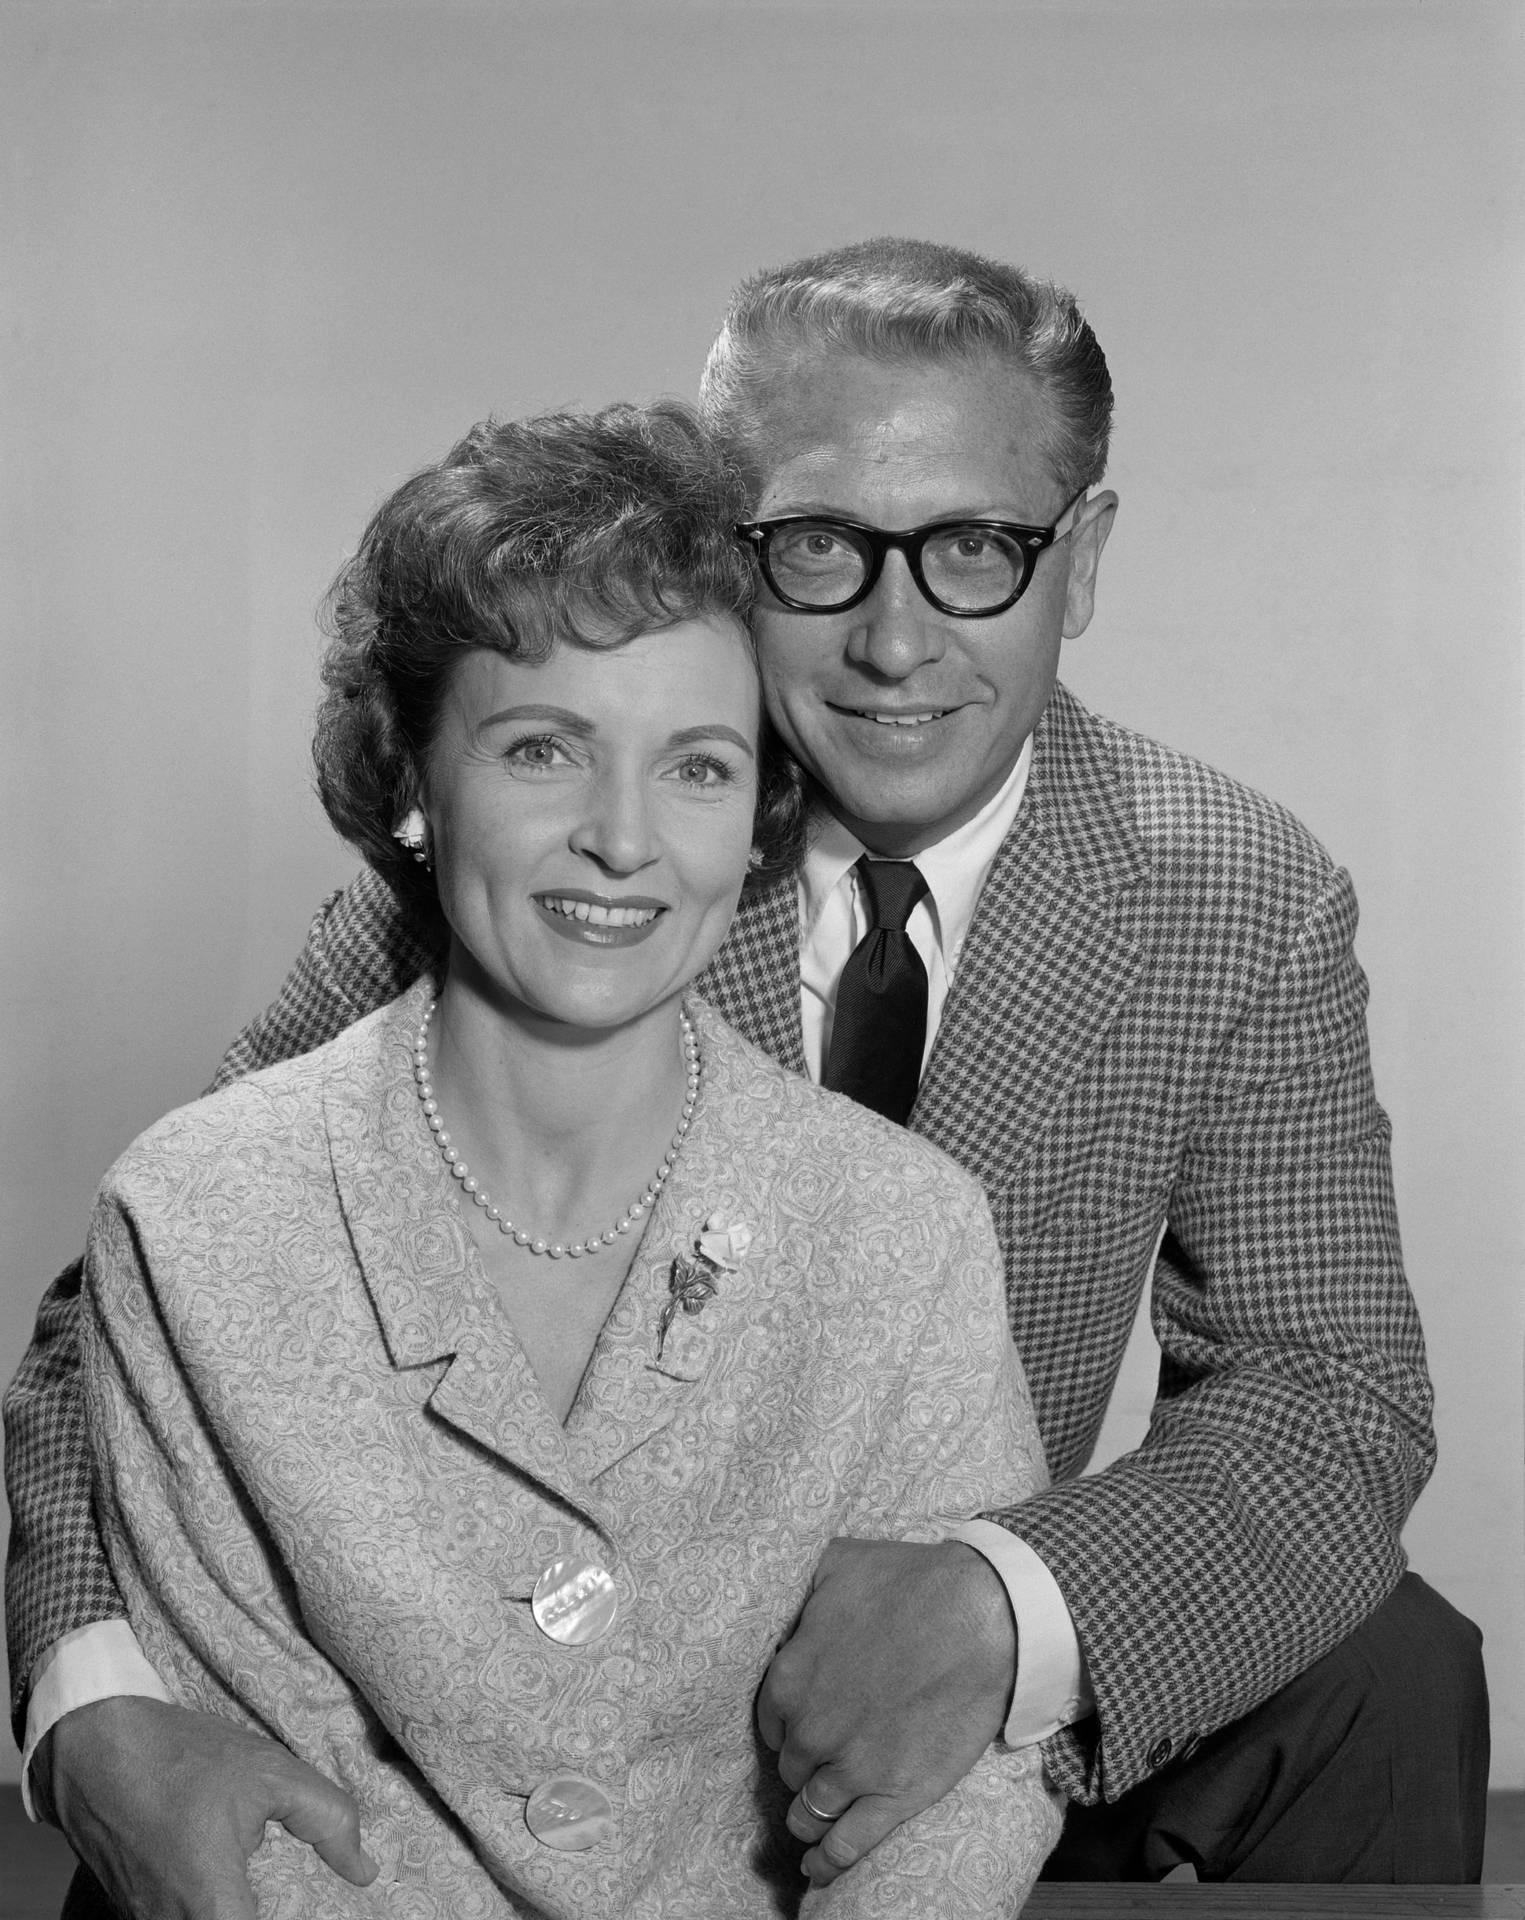 Iconic Television Stars Betty White And Allen Ludden In Their Prime. Background